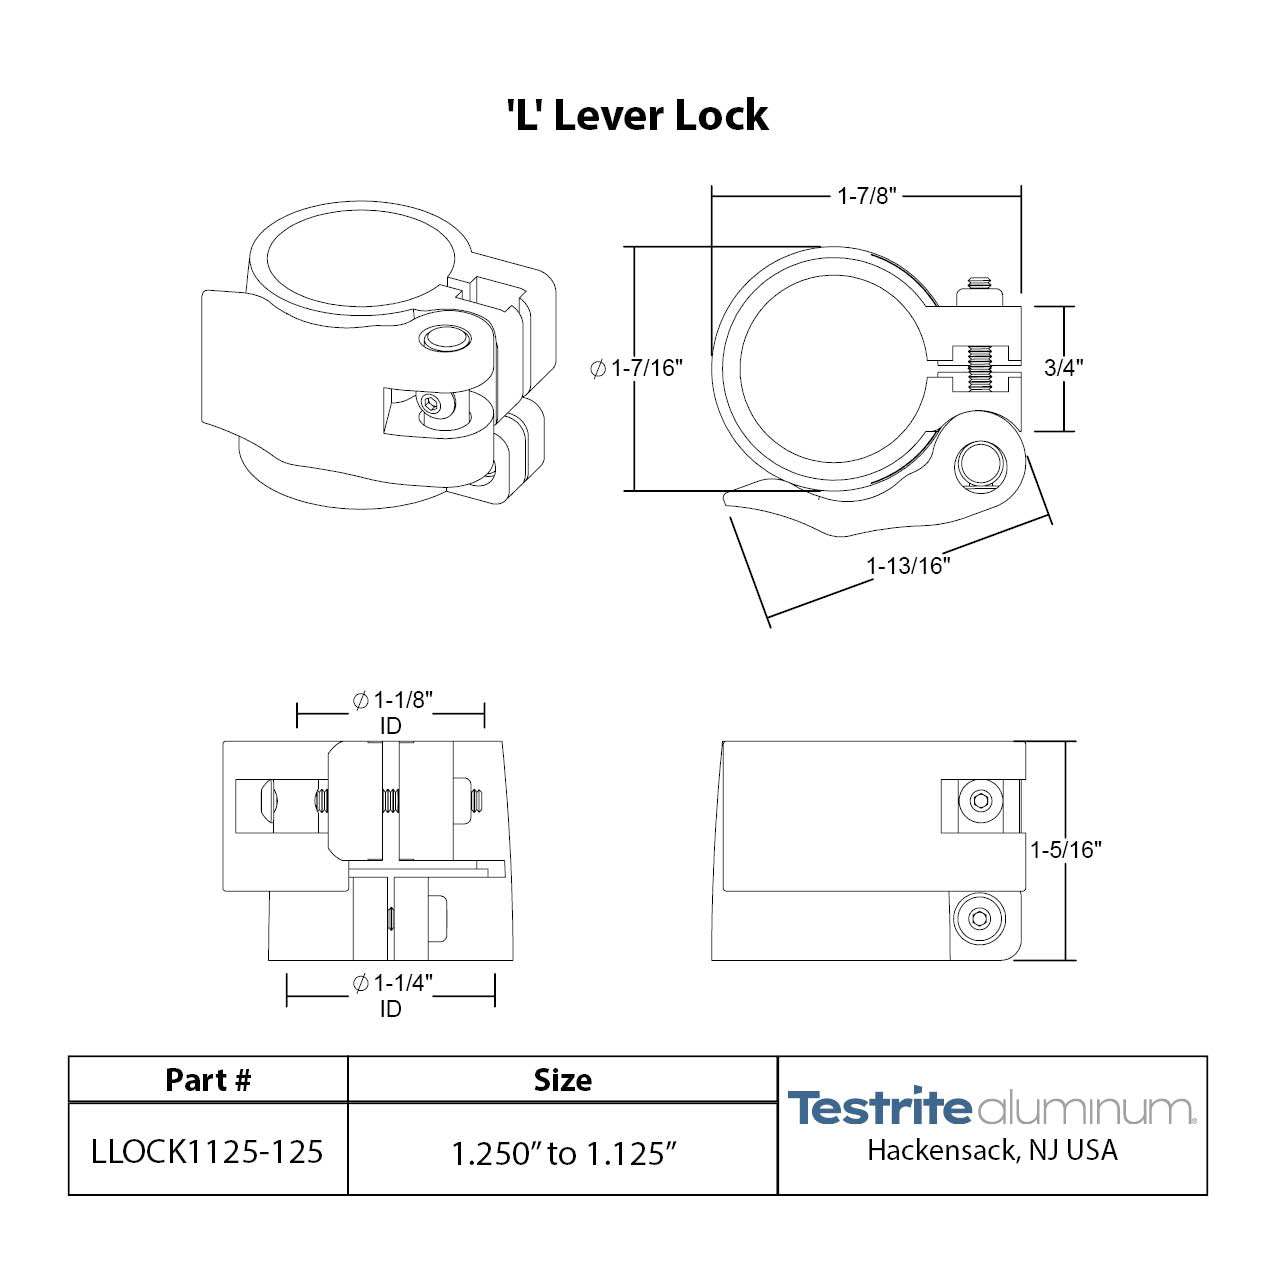 G Lock Spec sheet 1-1/8" to 1-1/4", telescopic tubing clamp 1.125" to 1.25"